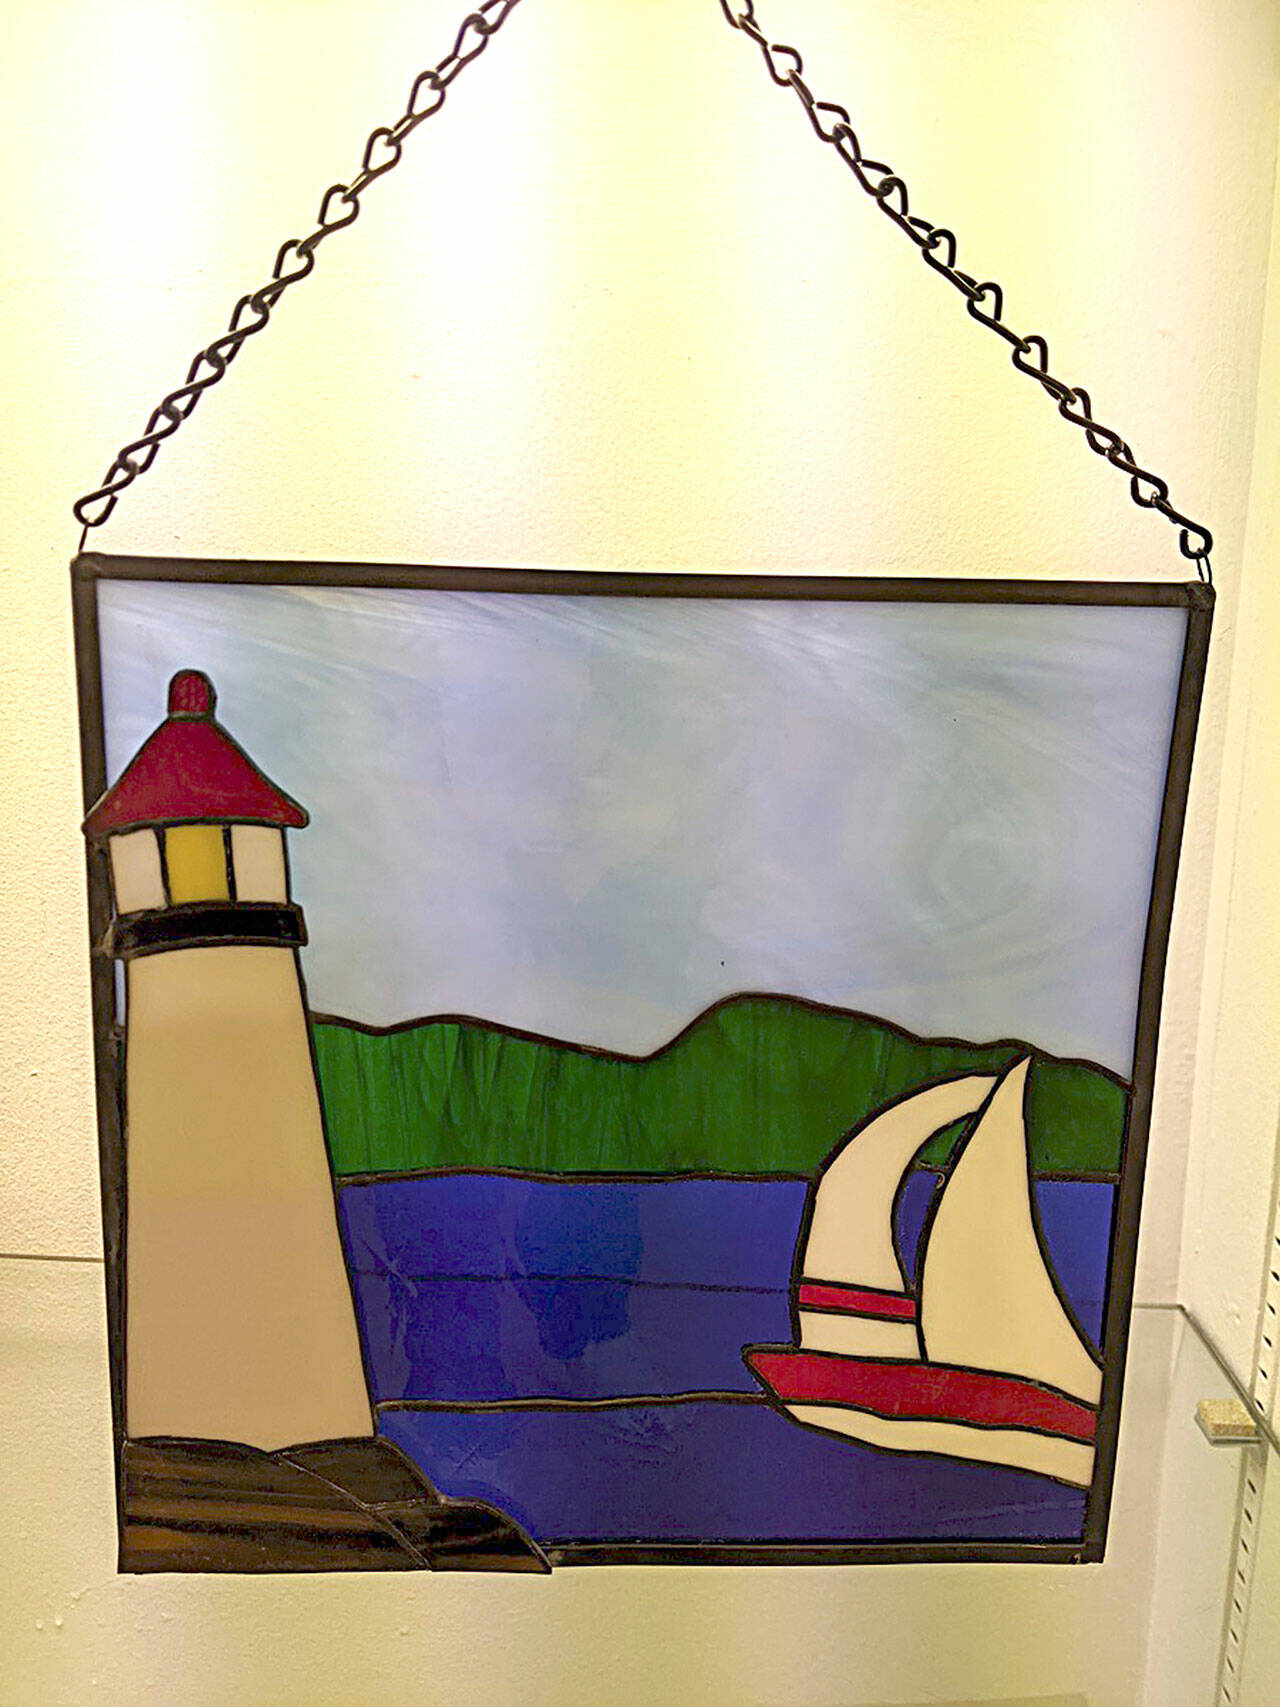 Submitted photo
June Echternkamp is one of the featured artists at the Blue Whole Gallery in July. “Sailing,” a stained glass work, is one of her many pieces on display.